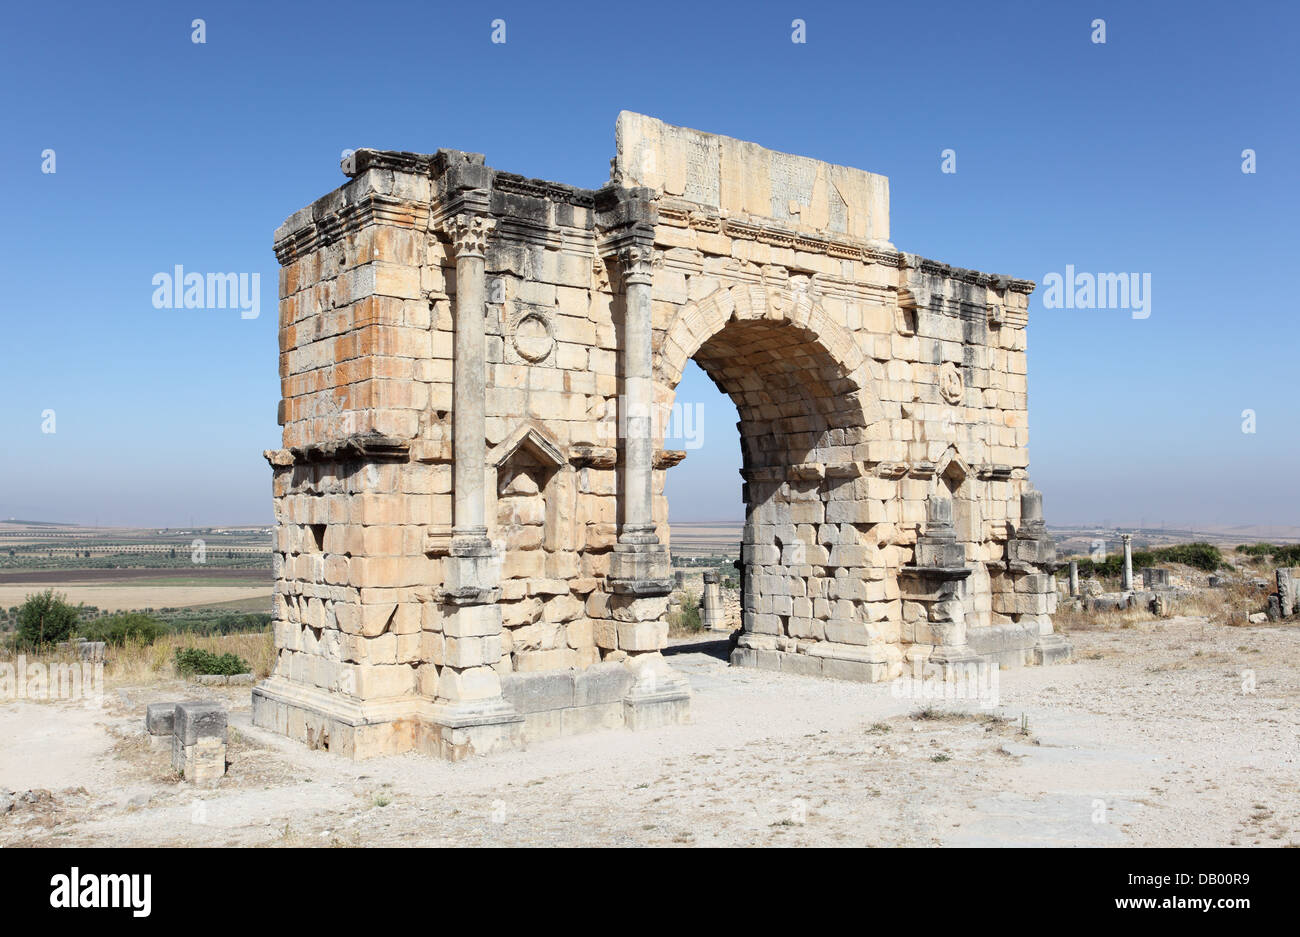 The Arch of Caracalla at Volubilis, Morocco, North Africa Stock Photo